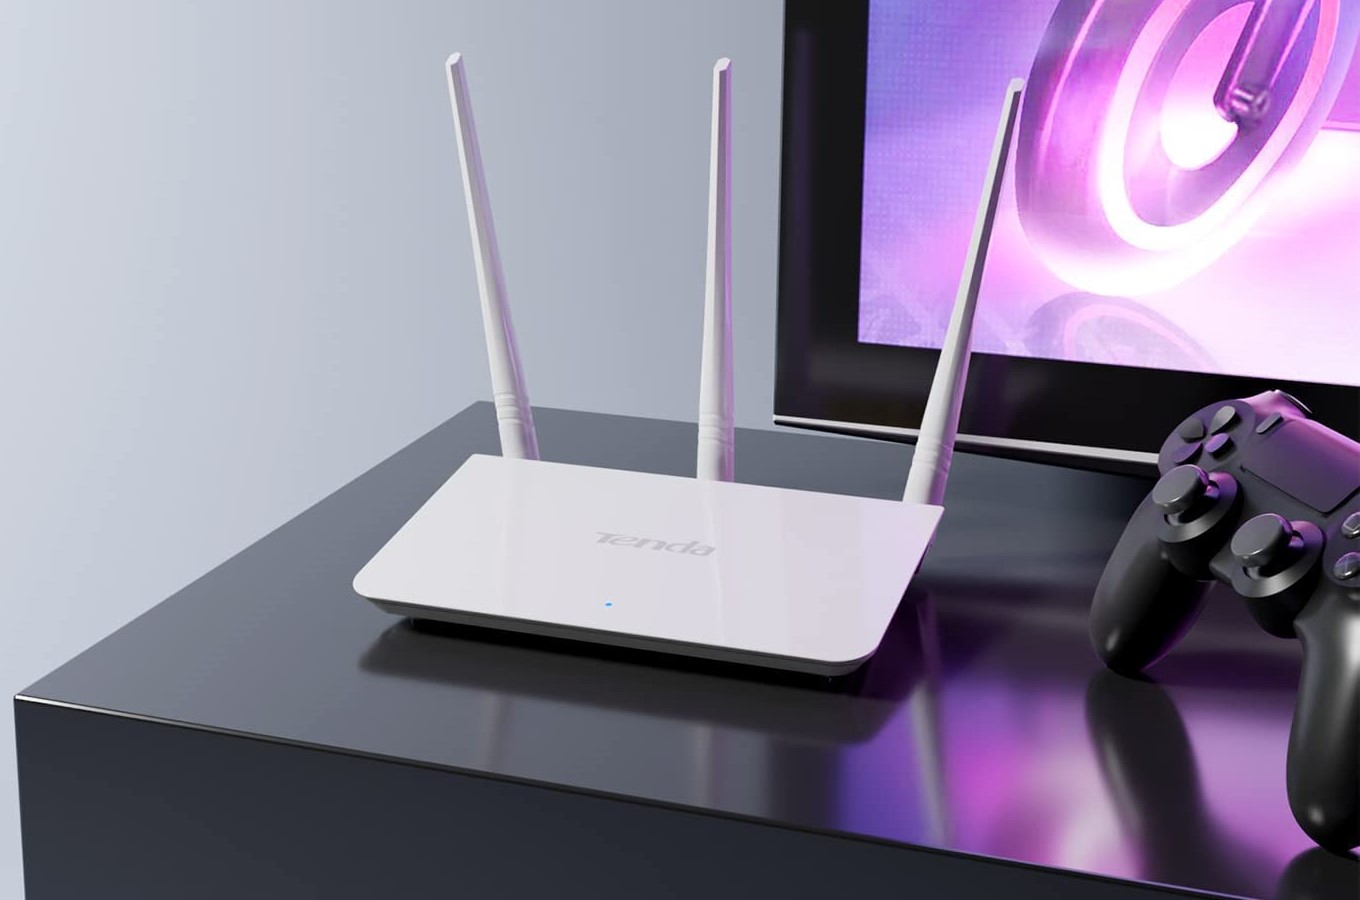 How To Set Up N300 Wi-Fi Router